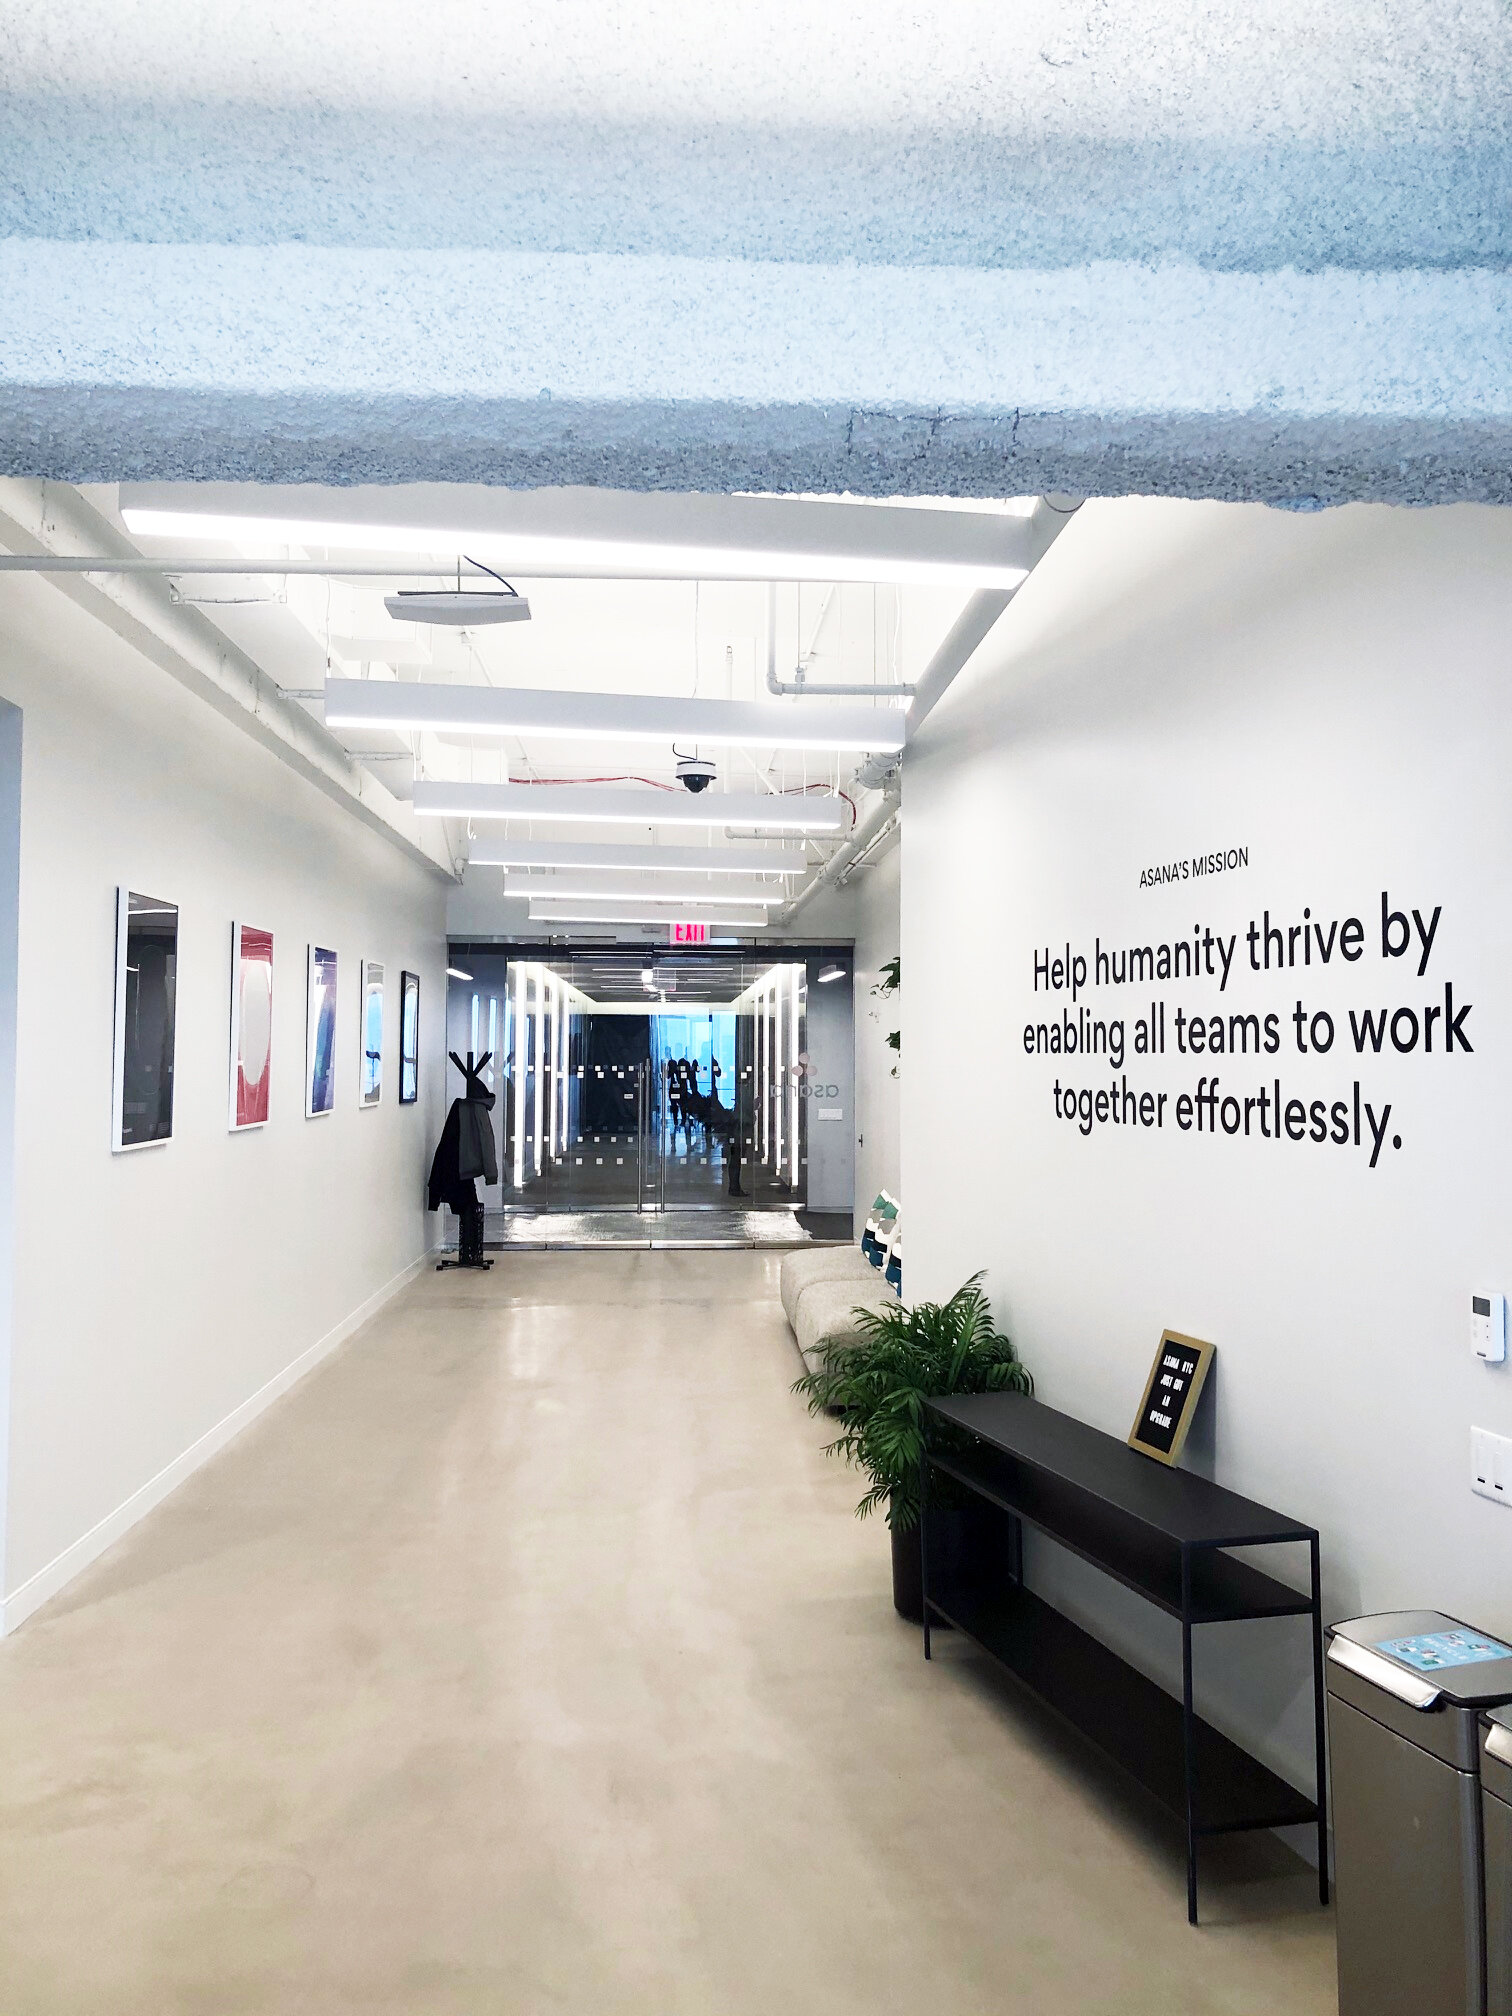 Asana hallway and mission statement at 3 WTC with MEP-FP engineering services provided by 2L Engineering. 